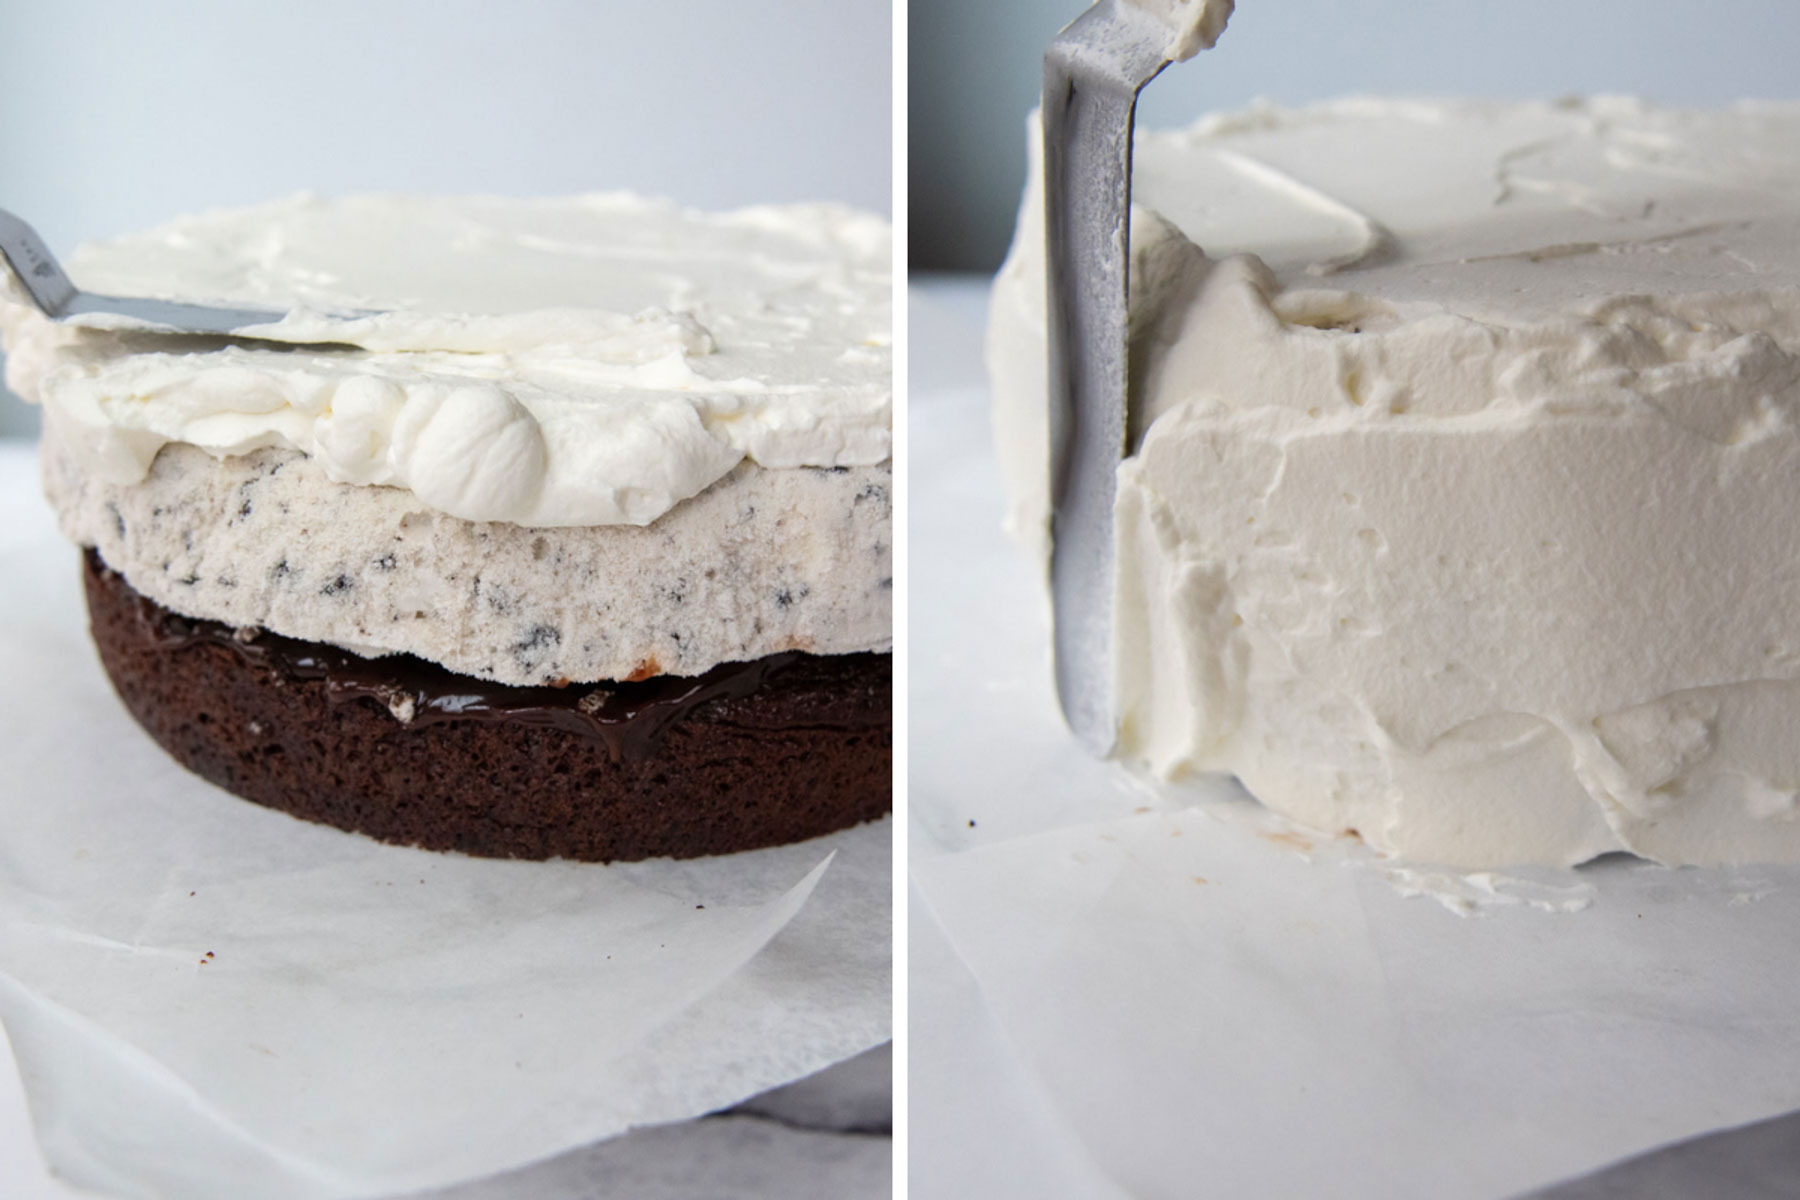 images showing how to frost the cake.